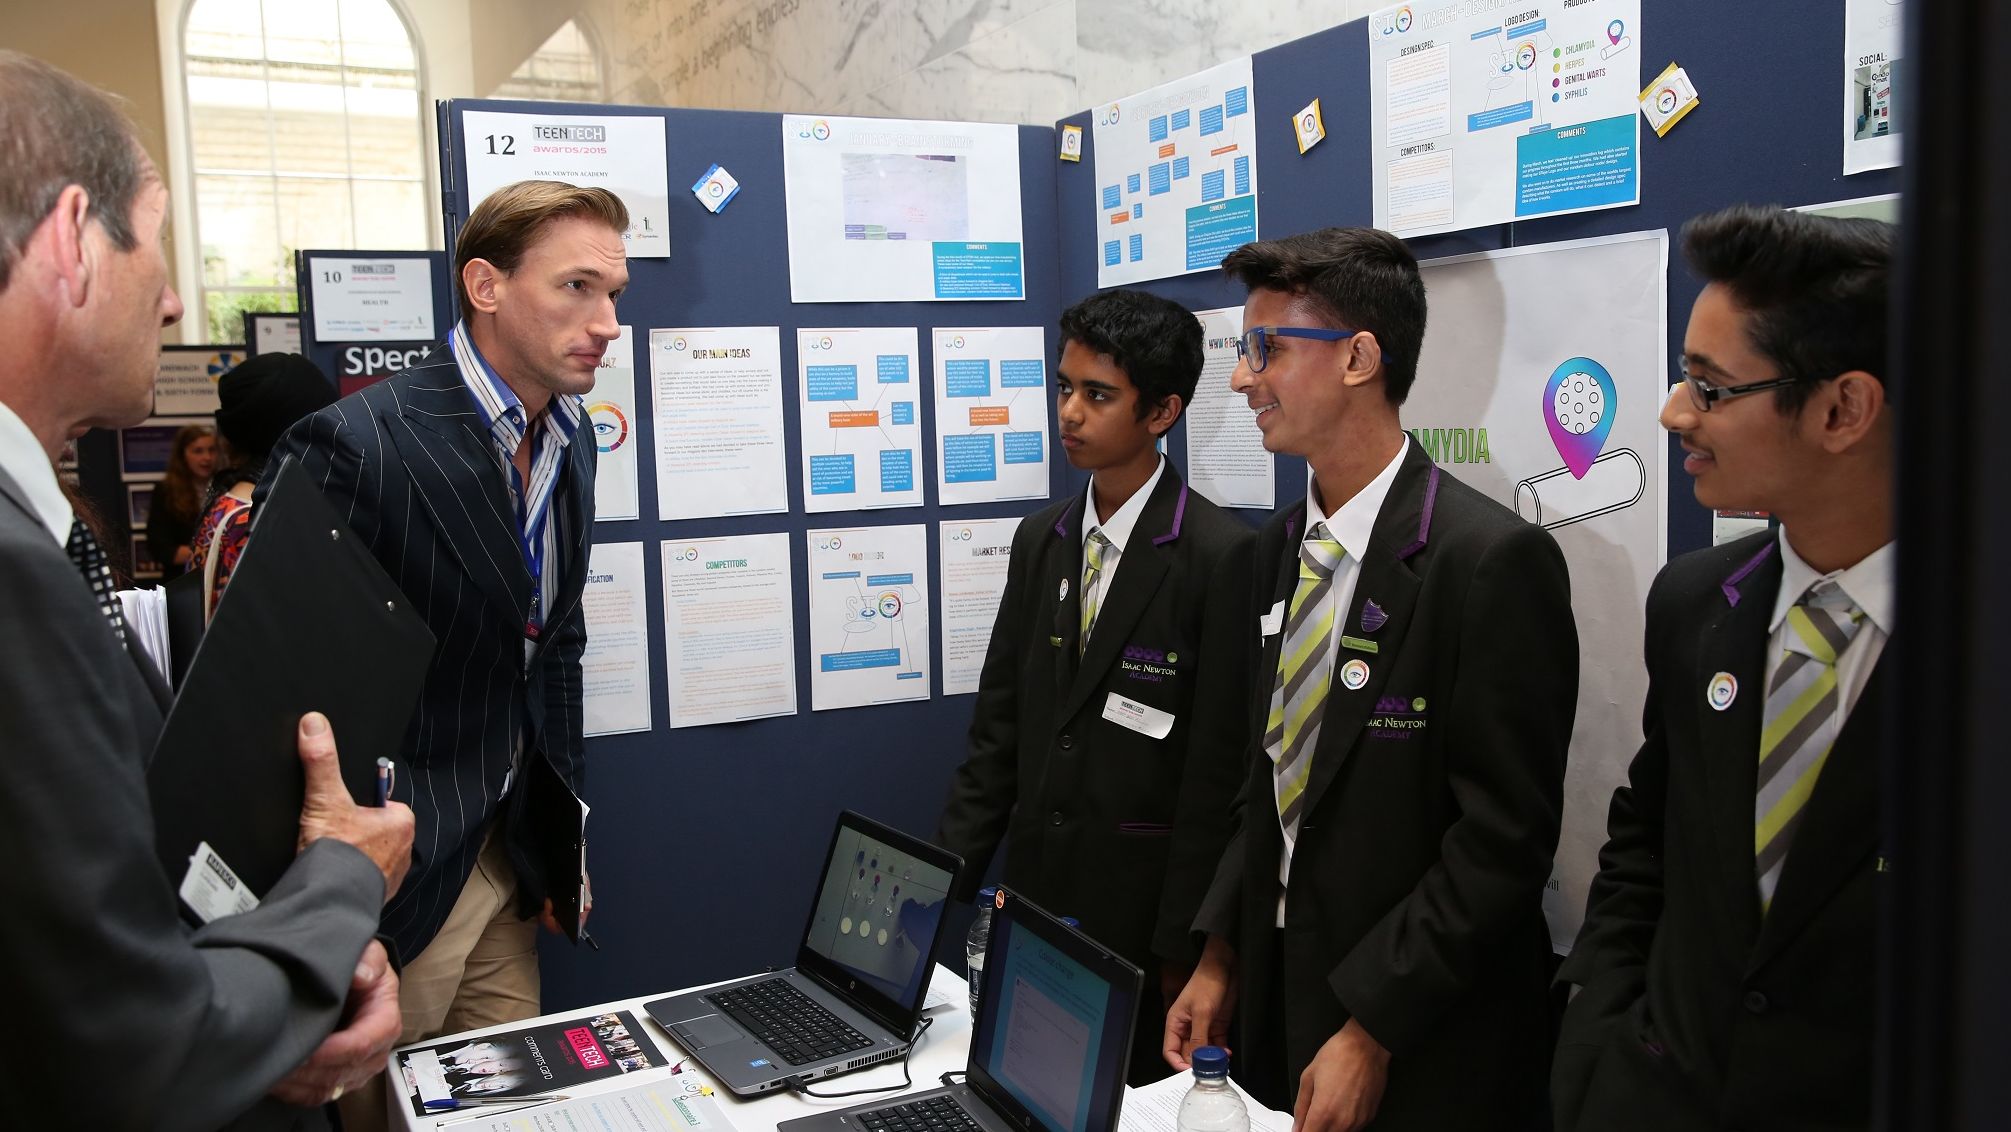 The teenage inventors talk to Dr Christian Jessen from the British TV series Embarrassing Bodies.